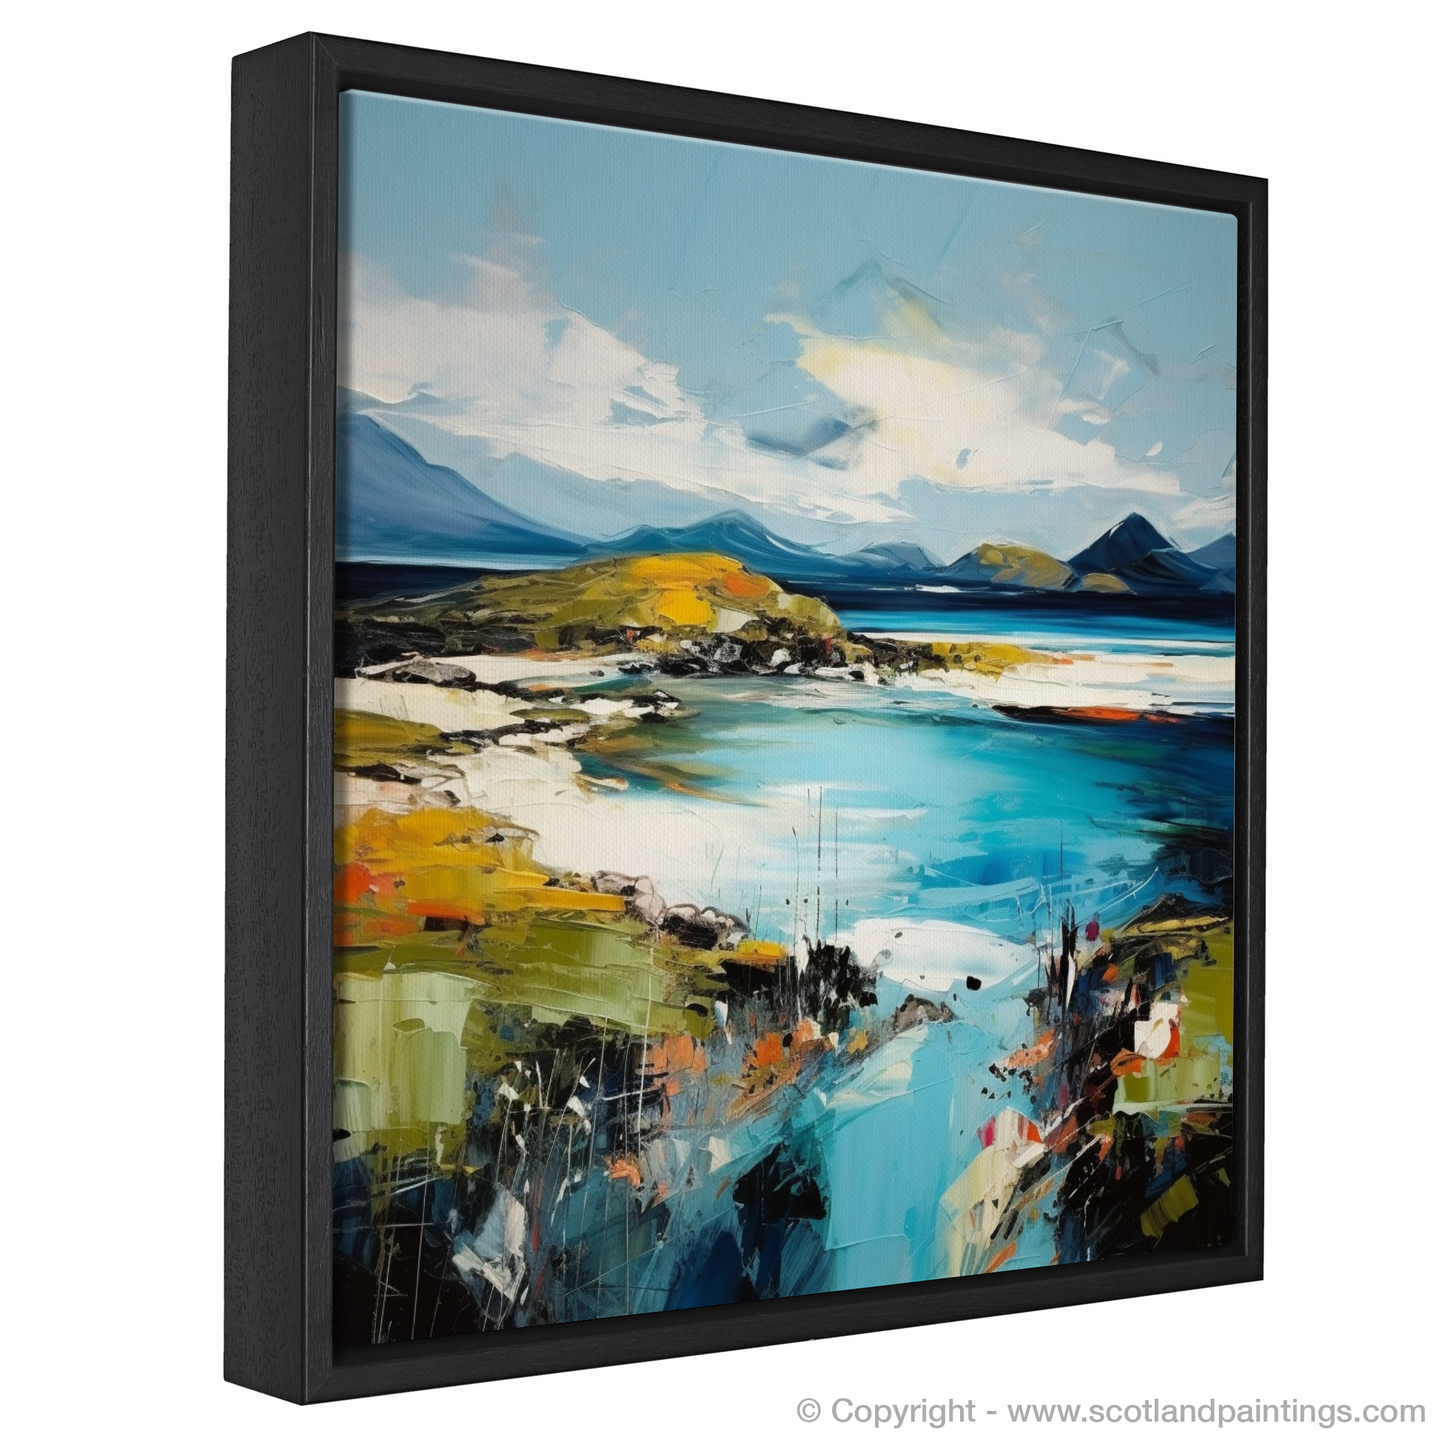 Painting and Art Print of Isle of Barra, Outer Hebrides entitled "Isle of Barra: An Expressionist Ode to Rugged Beauty".